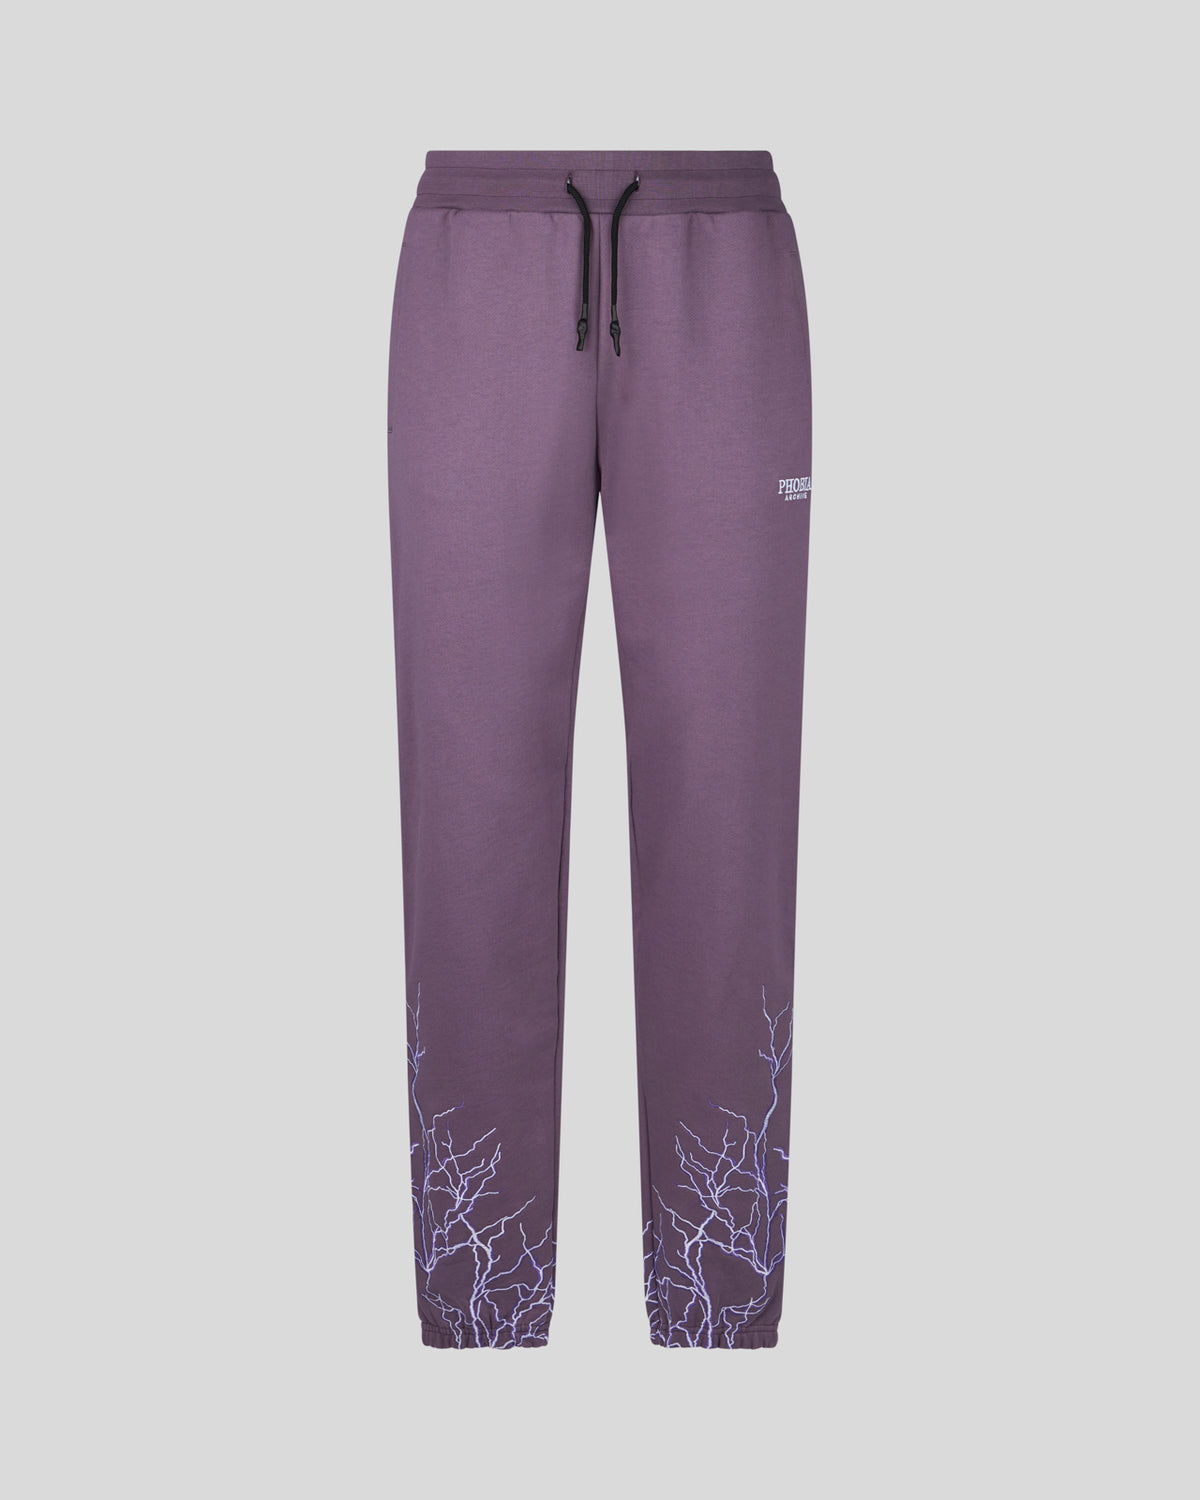 PHOBIA BLUE PANT WITH PURPLE EMBROIDERY LIGHTNING